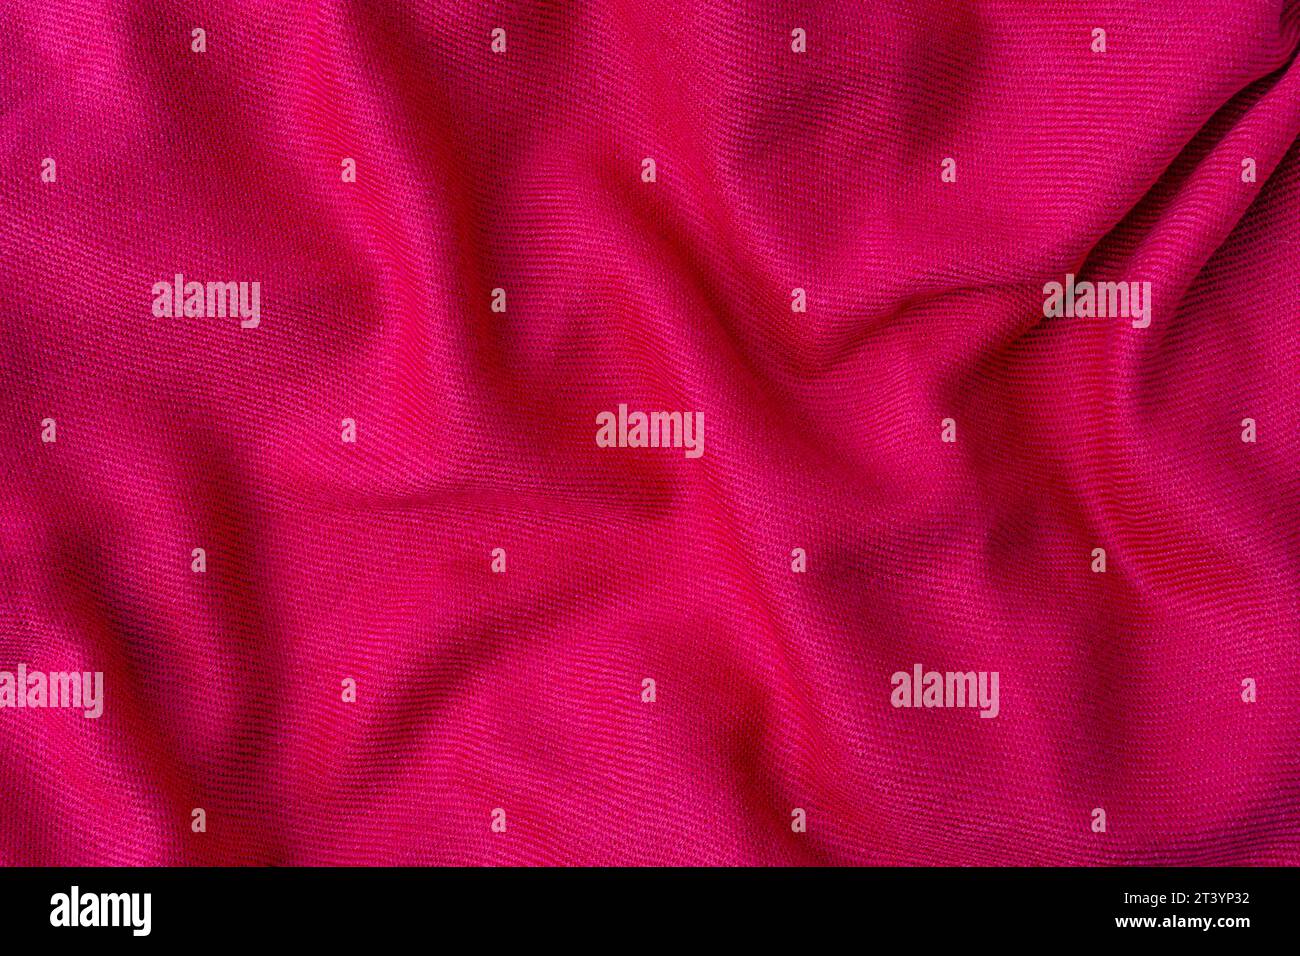 wrinkled pink fabric texture background close up Stock Photo